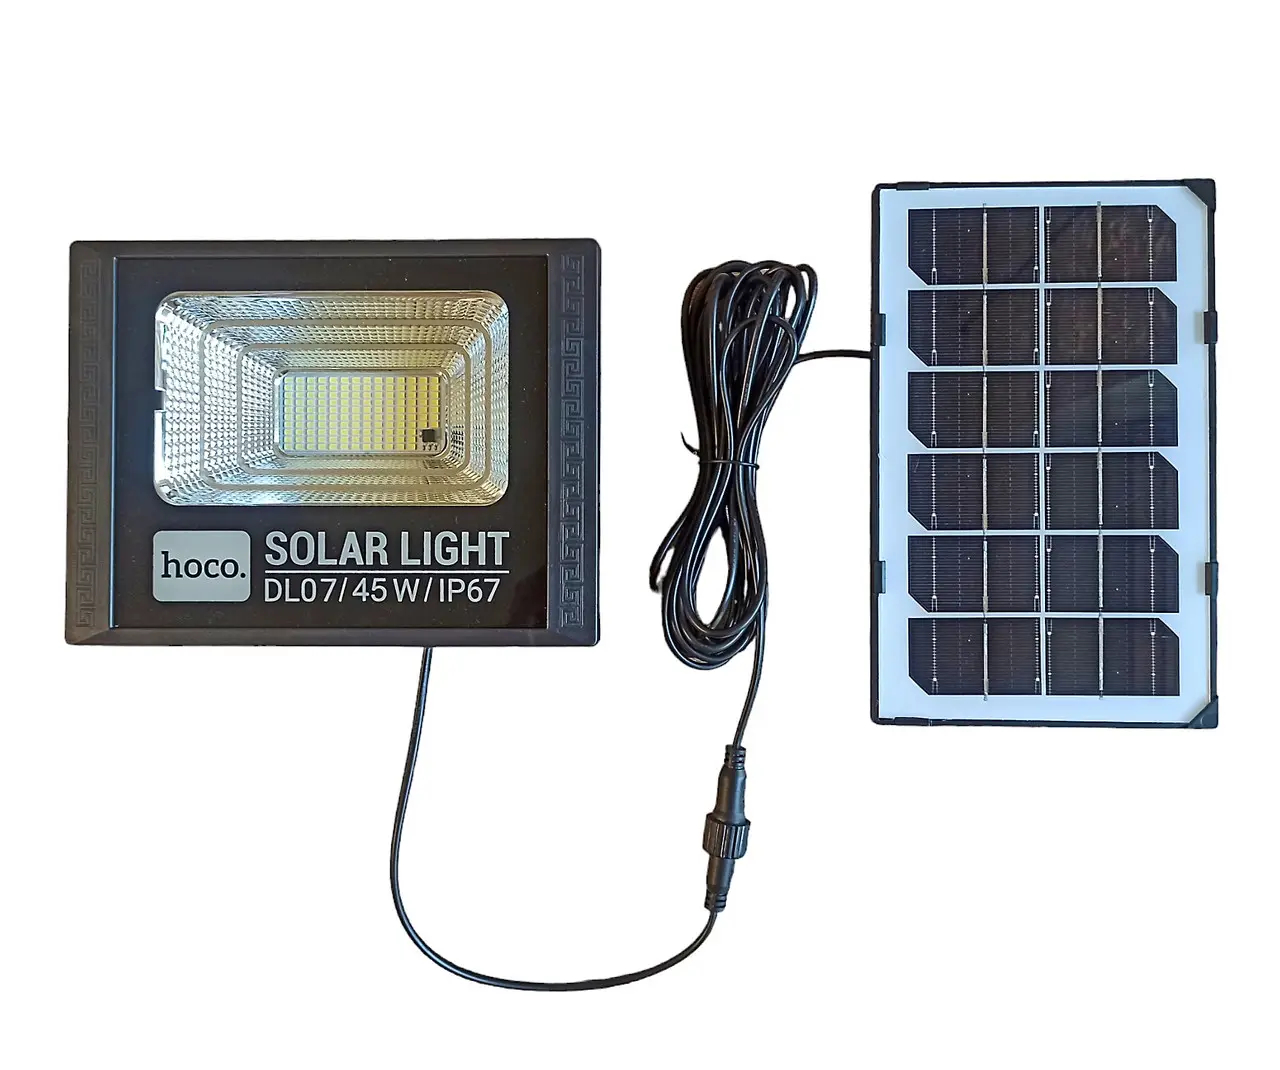 HOCO DL07 LED Solar Light 45W With Remote Control Waterproof